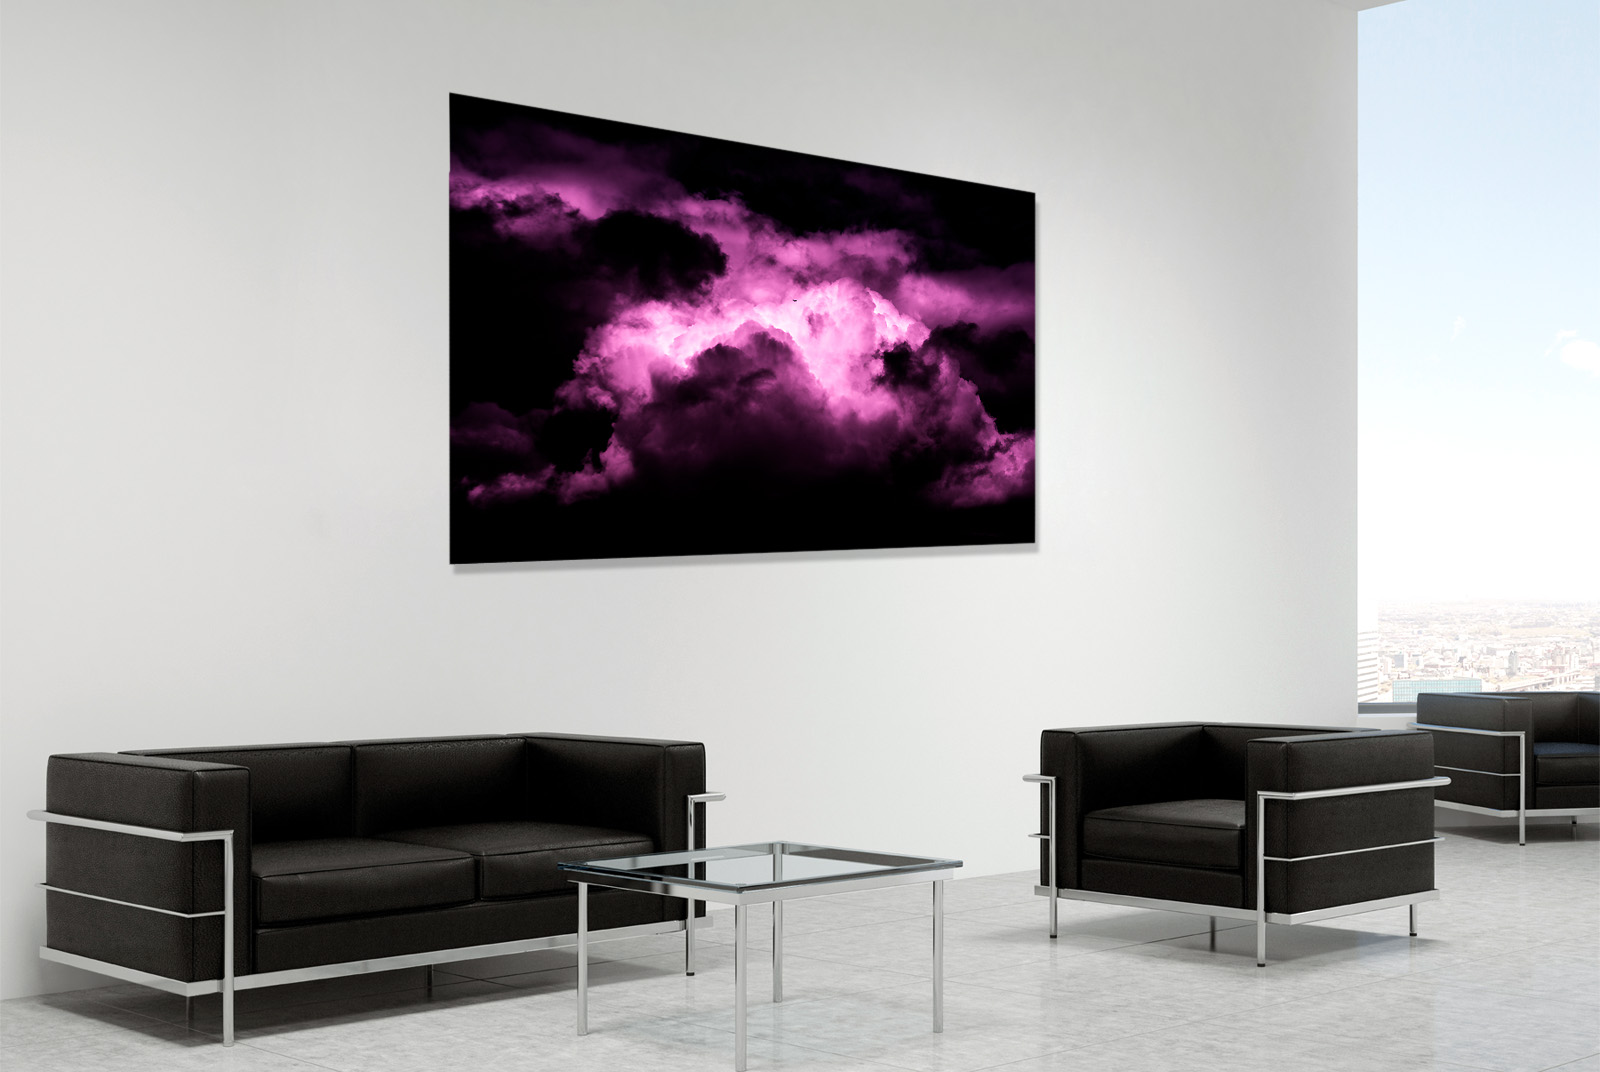 Silent. Fine art landscape photograph in a room setting - photo reference 5700.